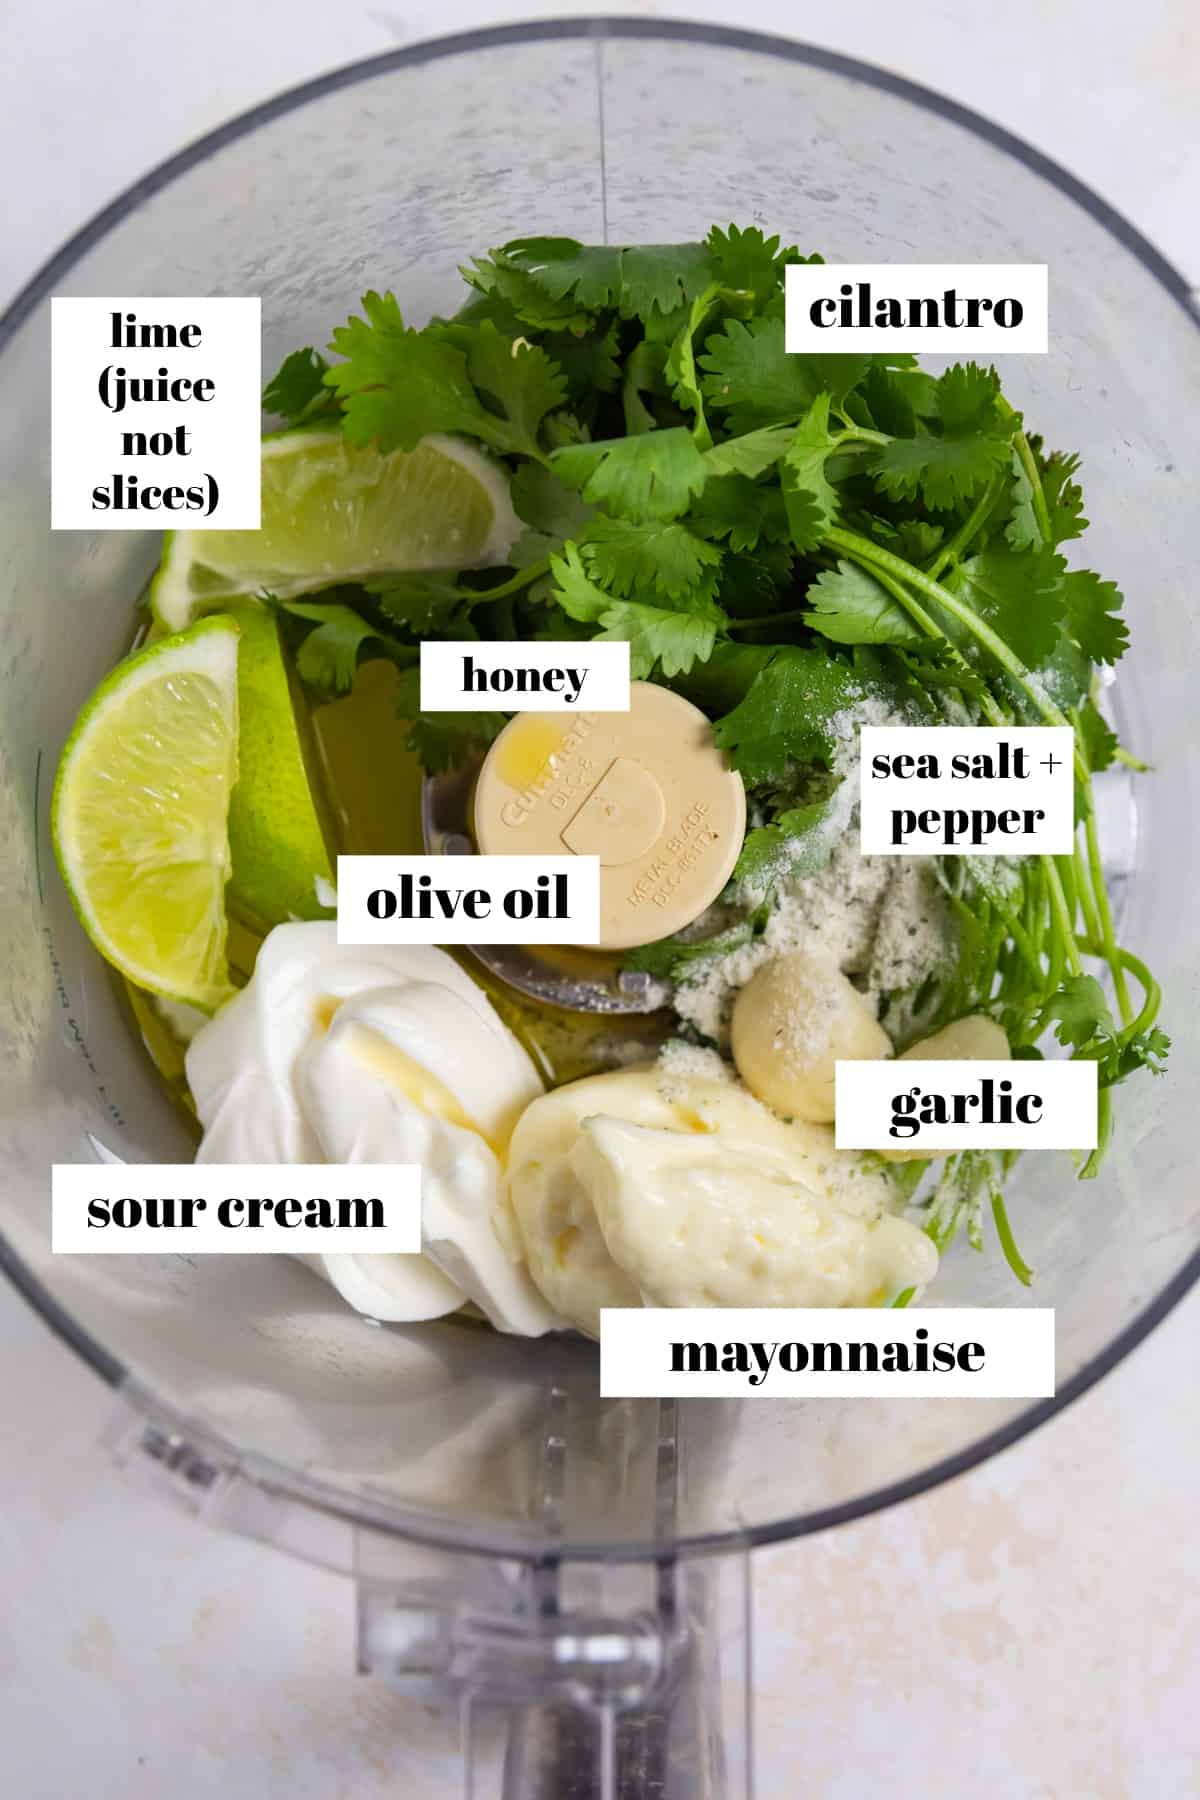 Food processor with cilantro, lime, mayo and other ingredients for dressing.